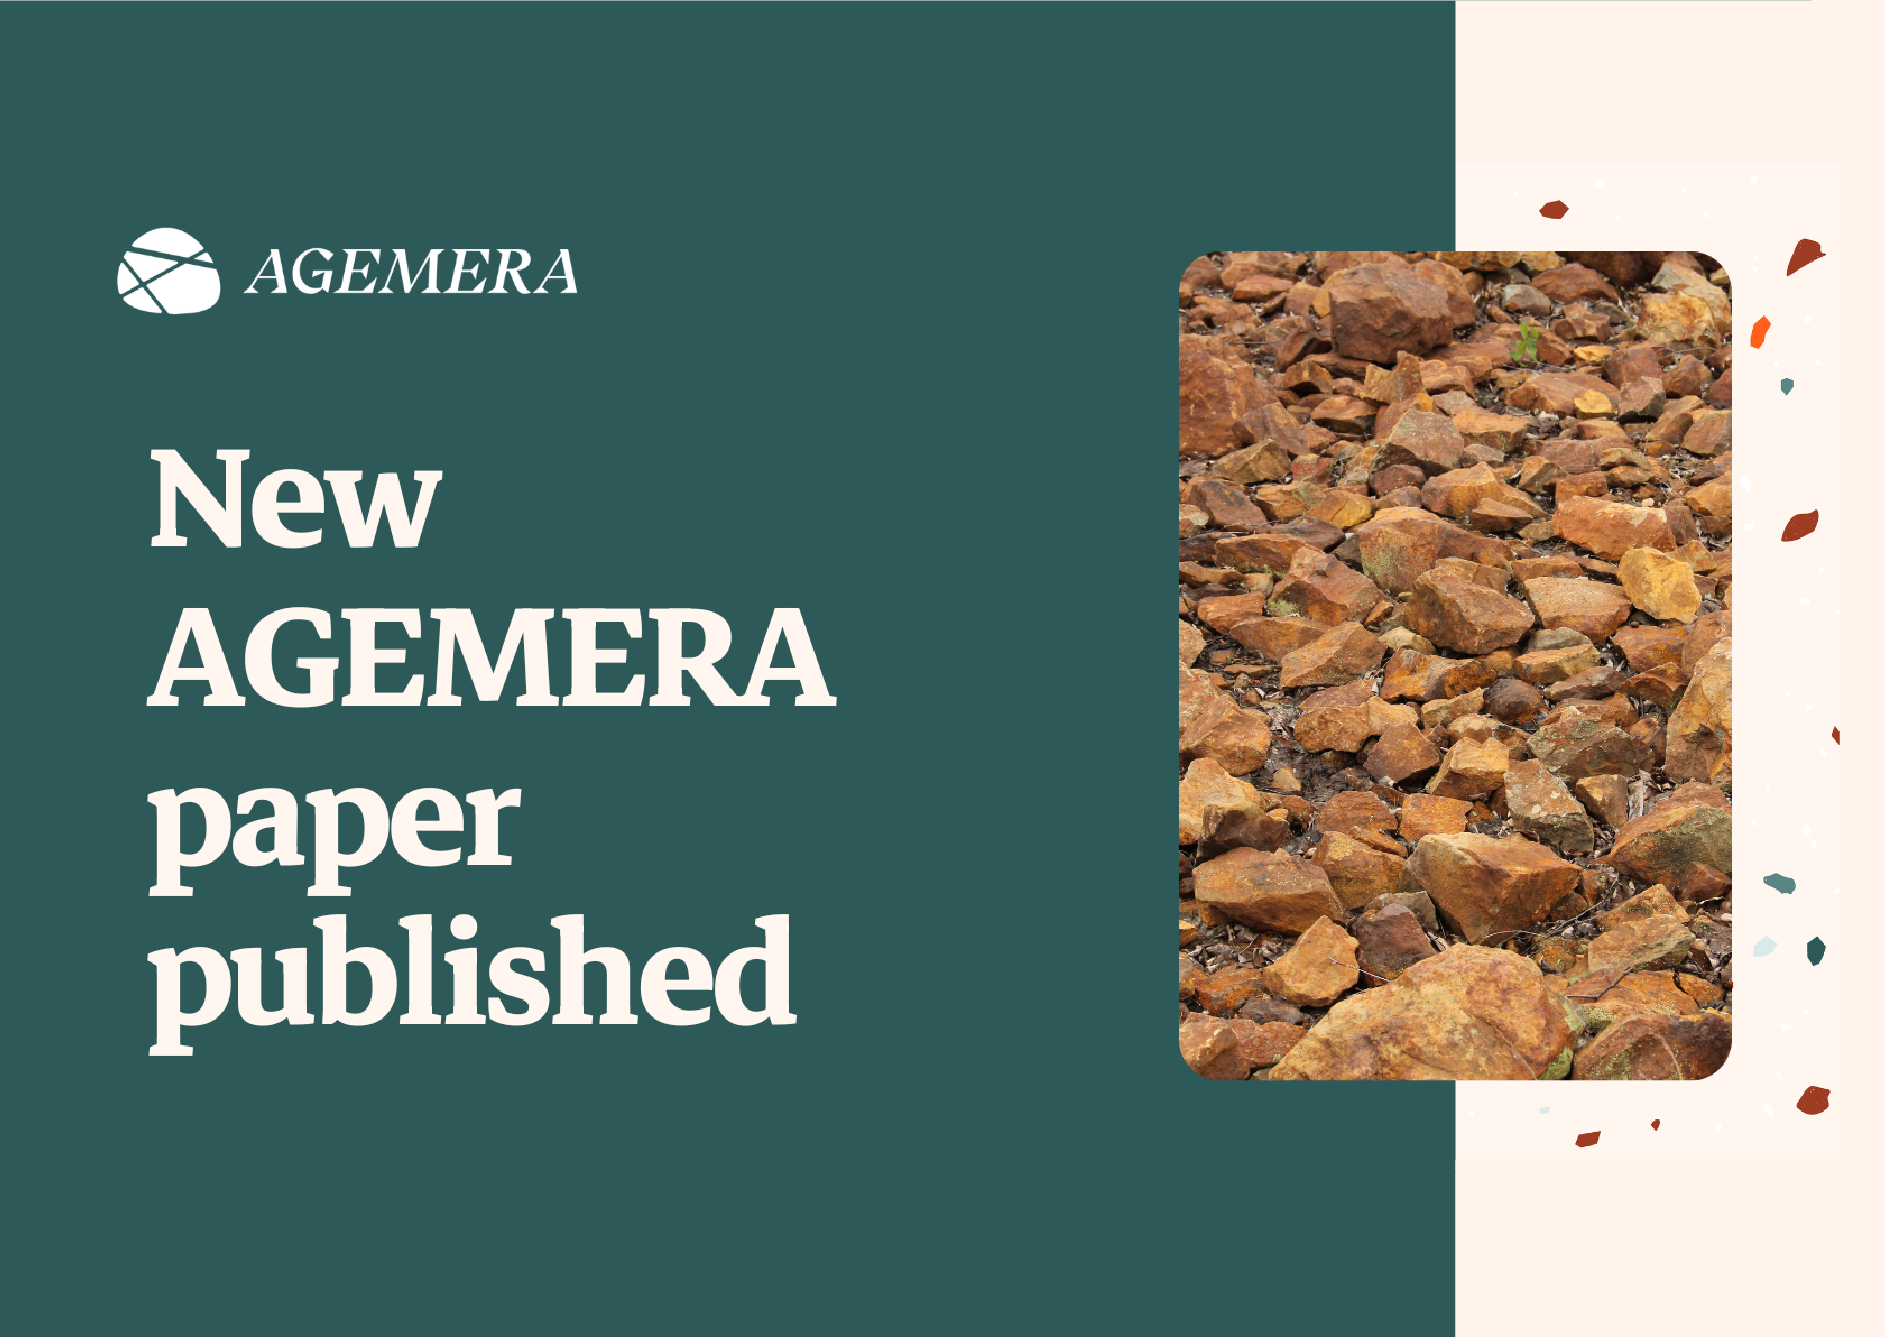 AGEMERA partner publishes new scientific paper with a case study on the Polish Deep Copper Mine